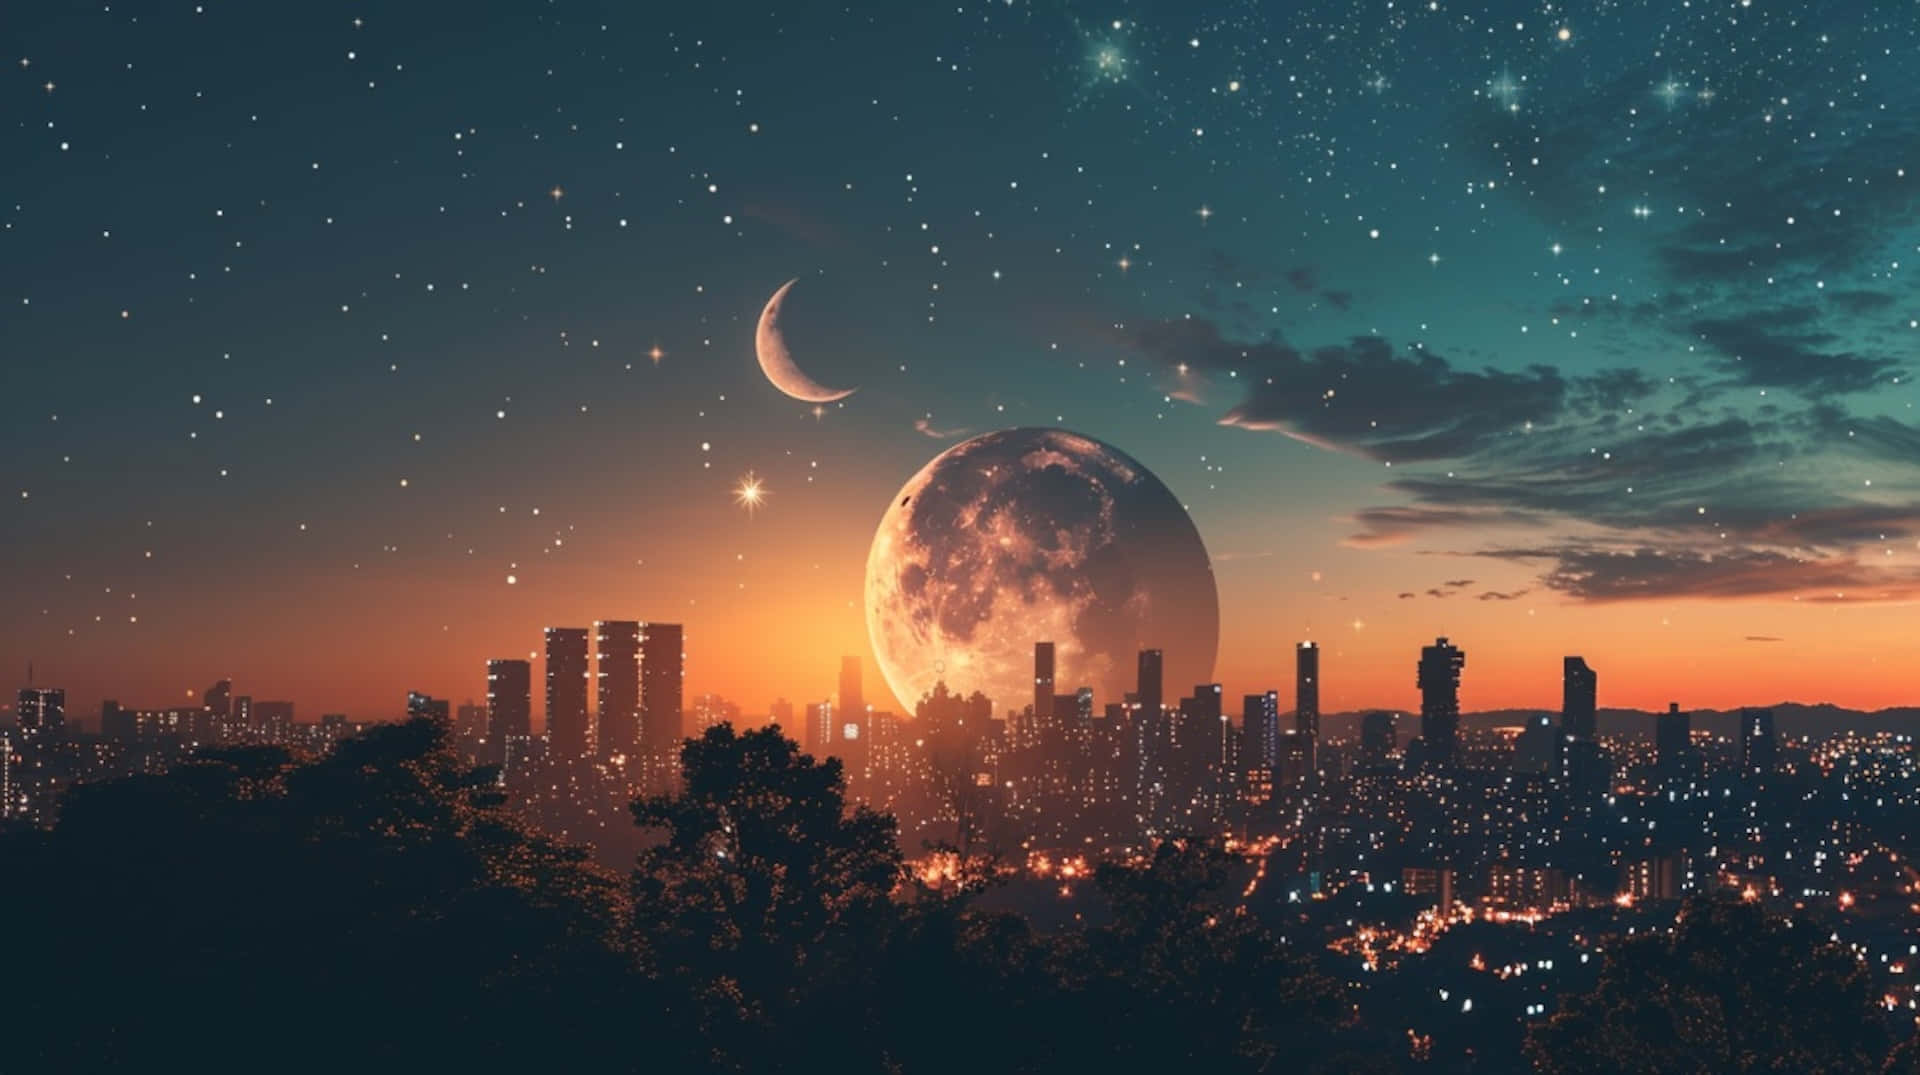 Starry_ Night_ Over_ City_with_ Moonset Wallpaper